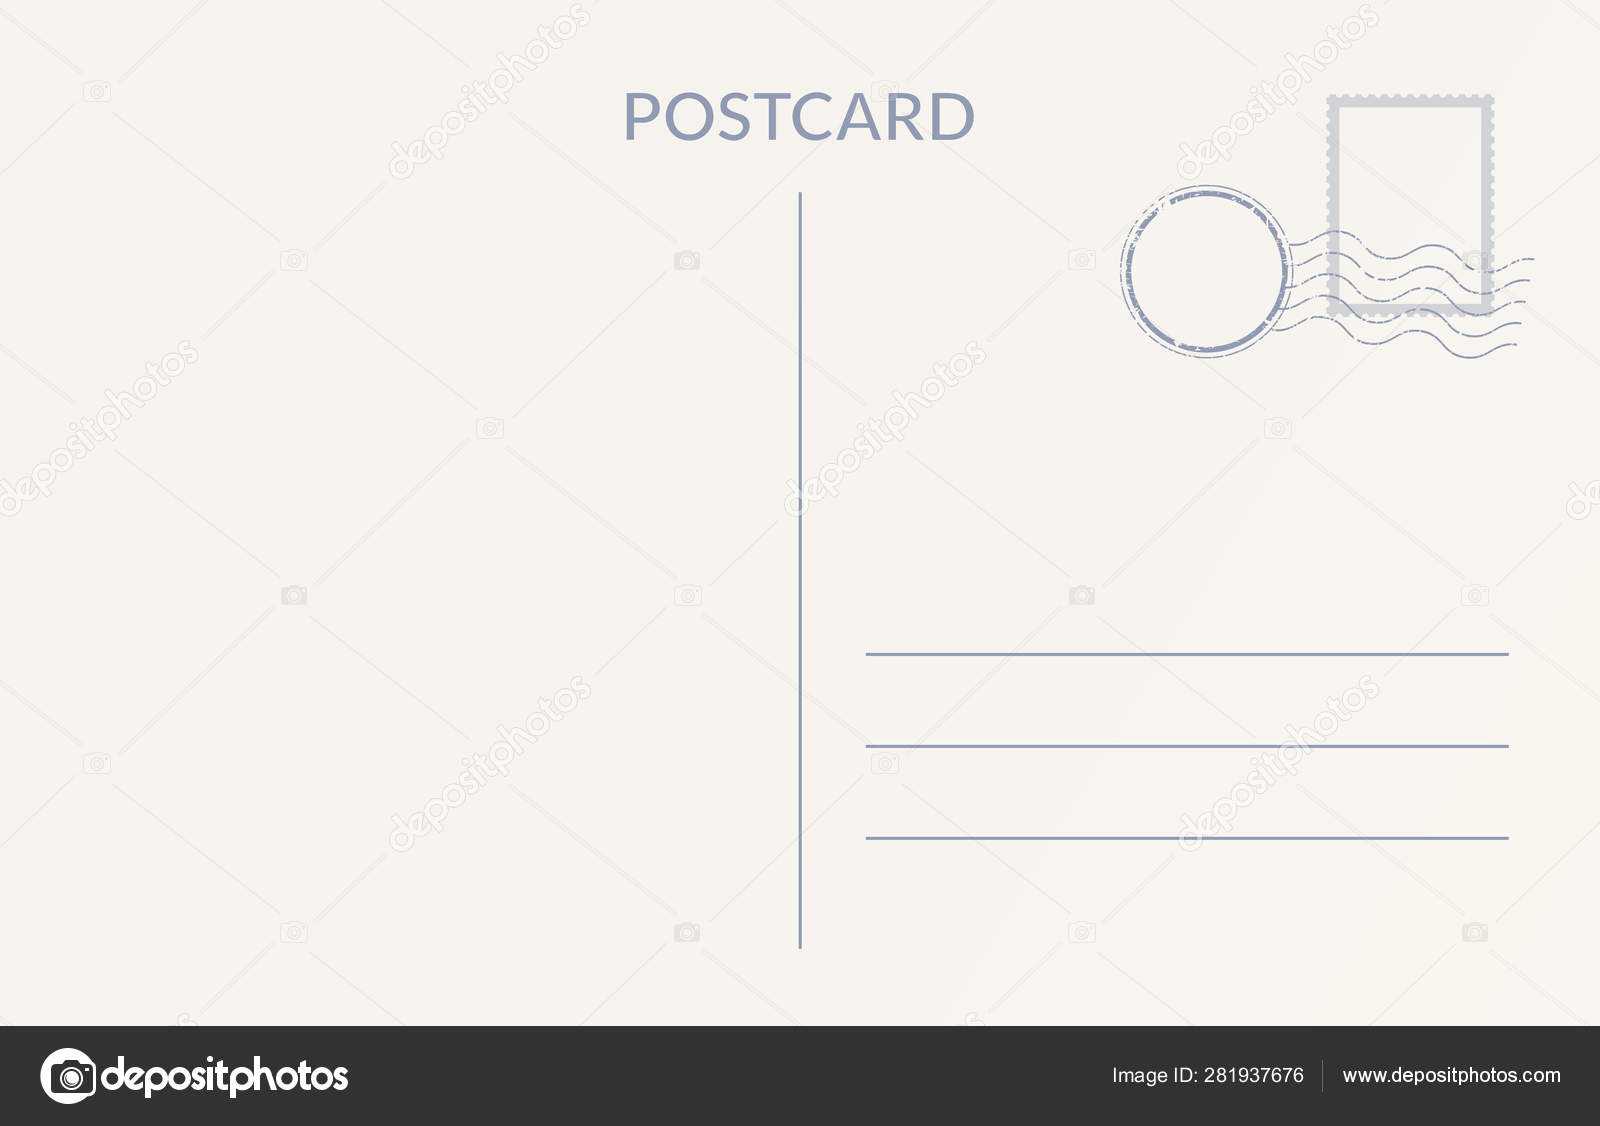 Empty Postcard Template. Design Of Blank Post Card Back For Post Cards Template